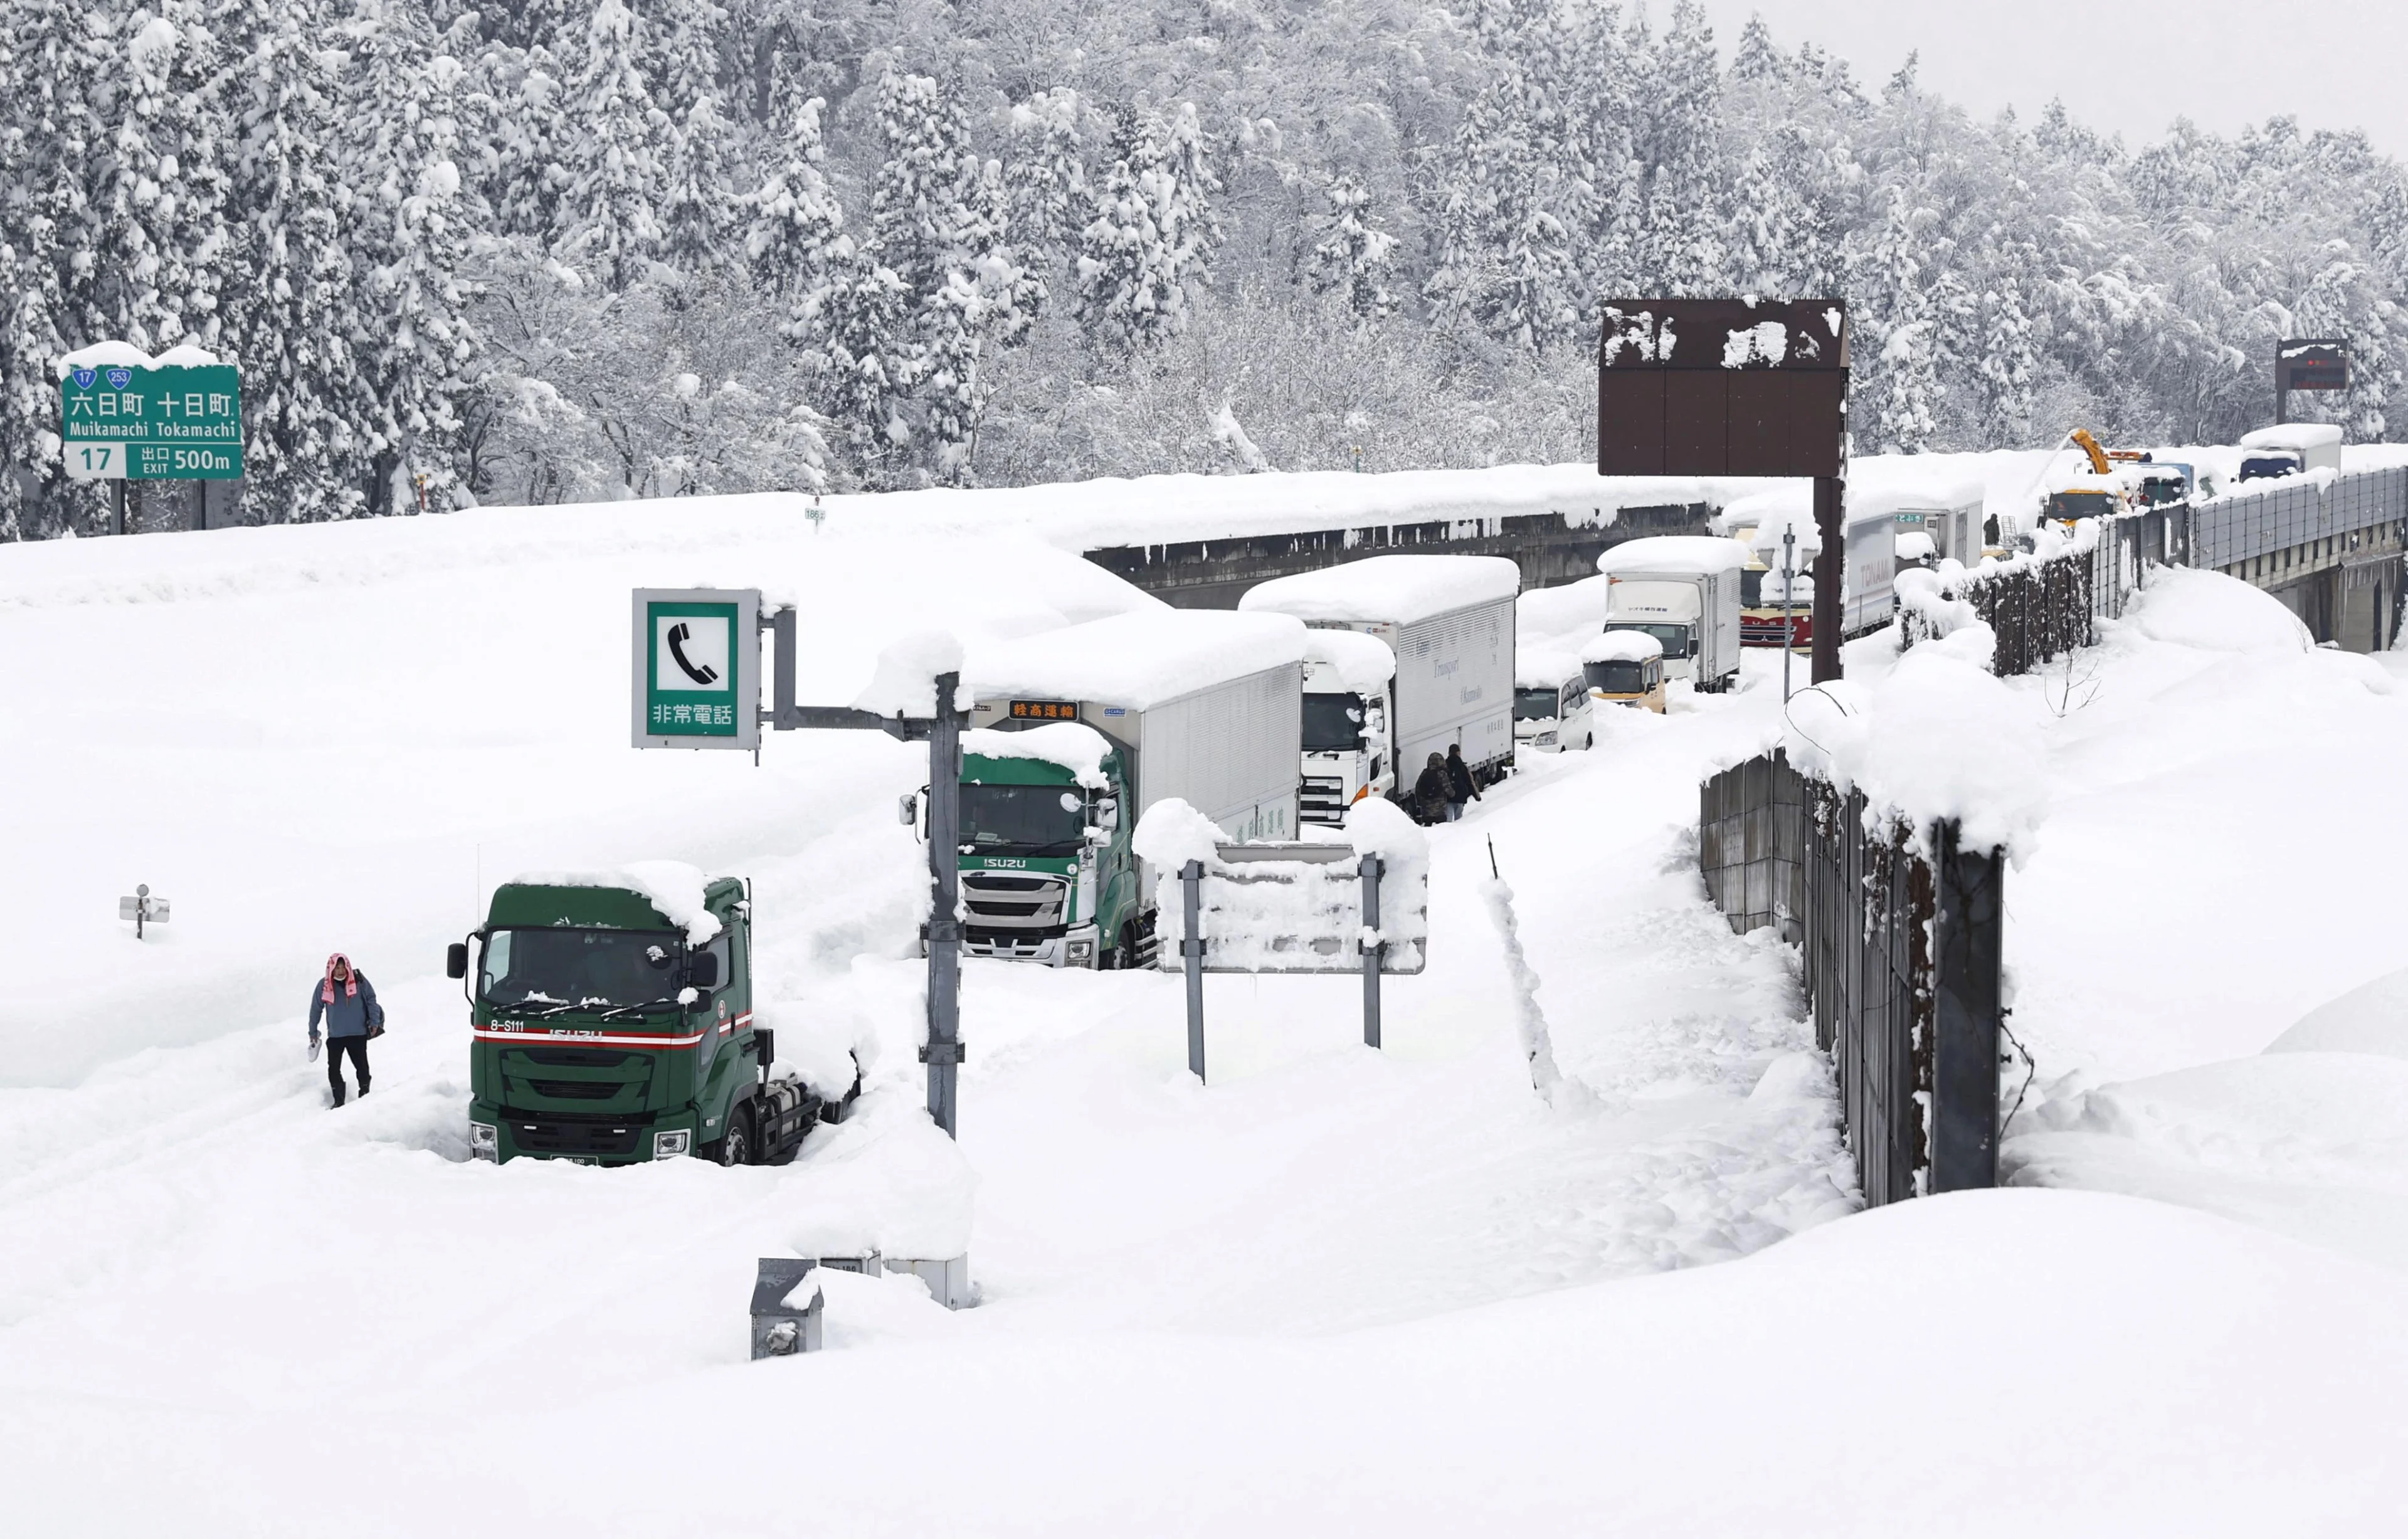 Vehicles are stranded on the snow-covered Kanetsu expressway in Minamiuonuma in Niigata Prefecture, Japan in this photo taken by Kyodo December 18, 2020 Mandatory credit Kyodo/via REUTERS ATTENTION EDITORS - THIS IMAGE WAS PROVIDED BY A THIRD PARTY. MANDATORY CREDIT. JAPAN OUT. NO COMMERCIAL OR EDITORIAL SALES IN JAPAN